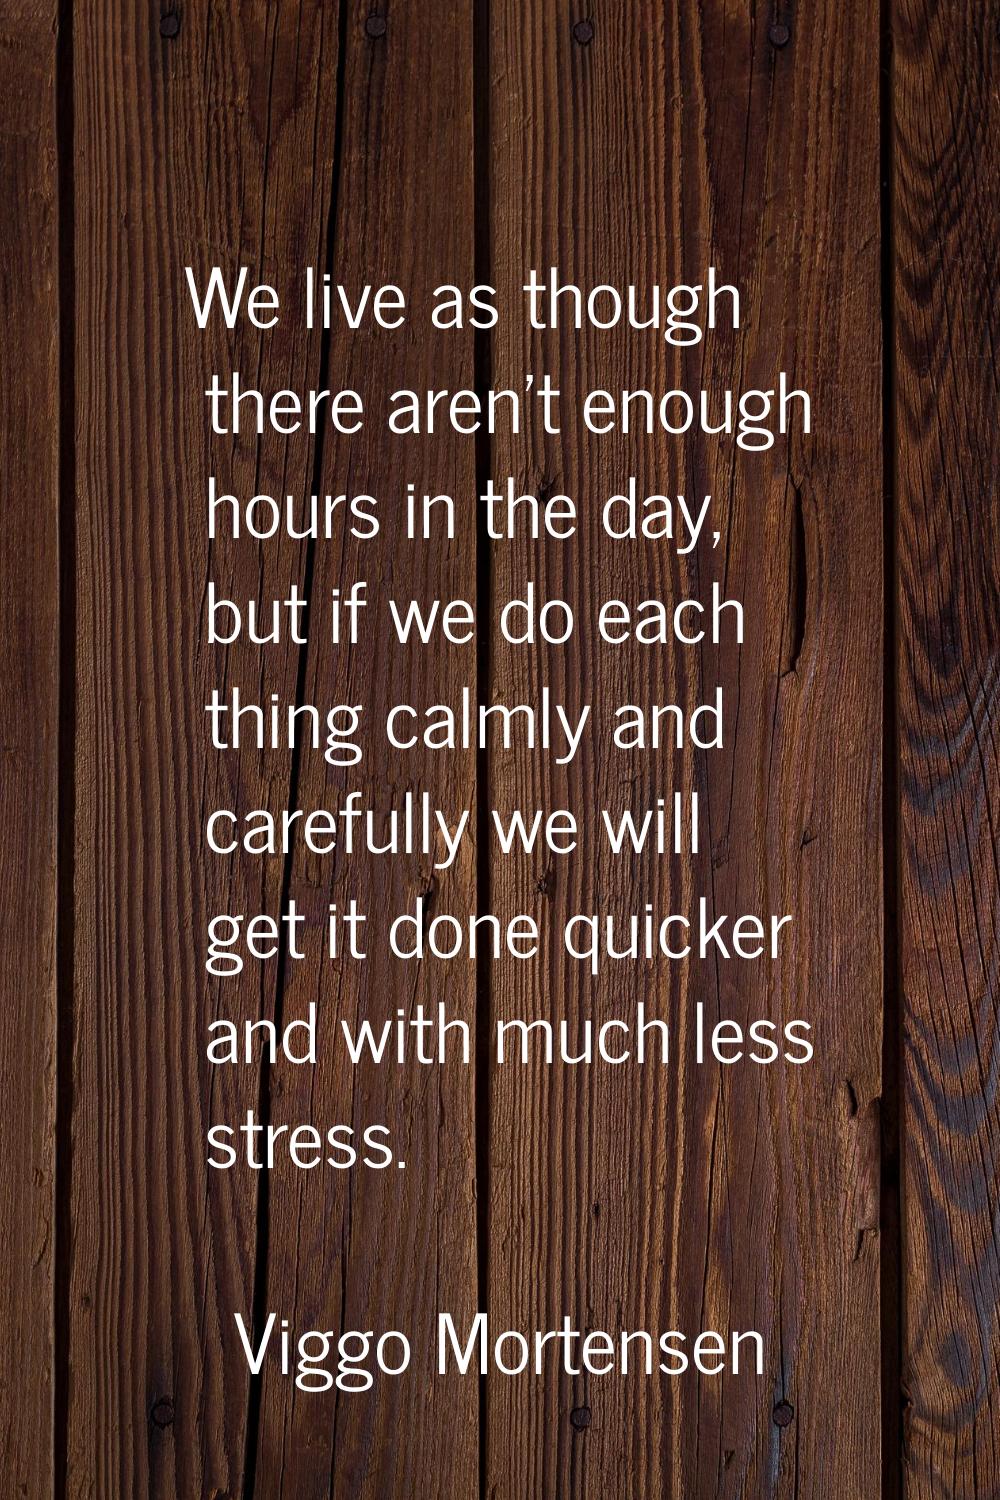 We live as though there aren't enough hours in the day, but if we do each thing calmly and carefull